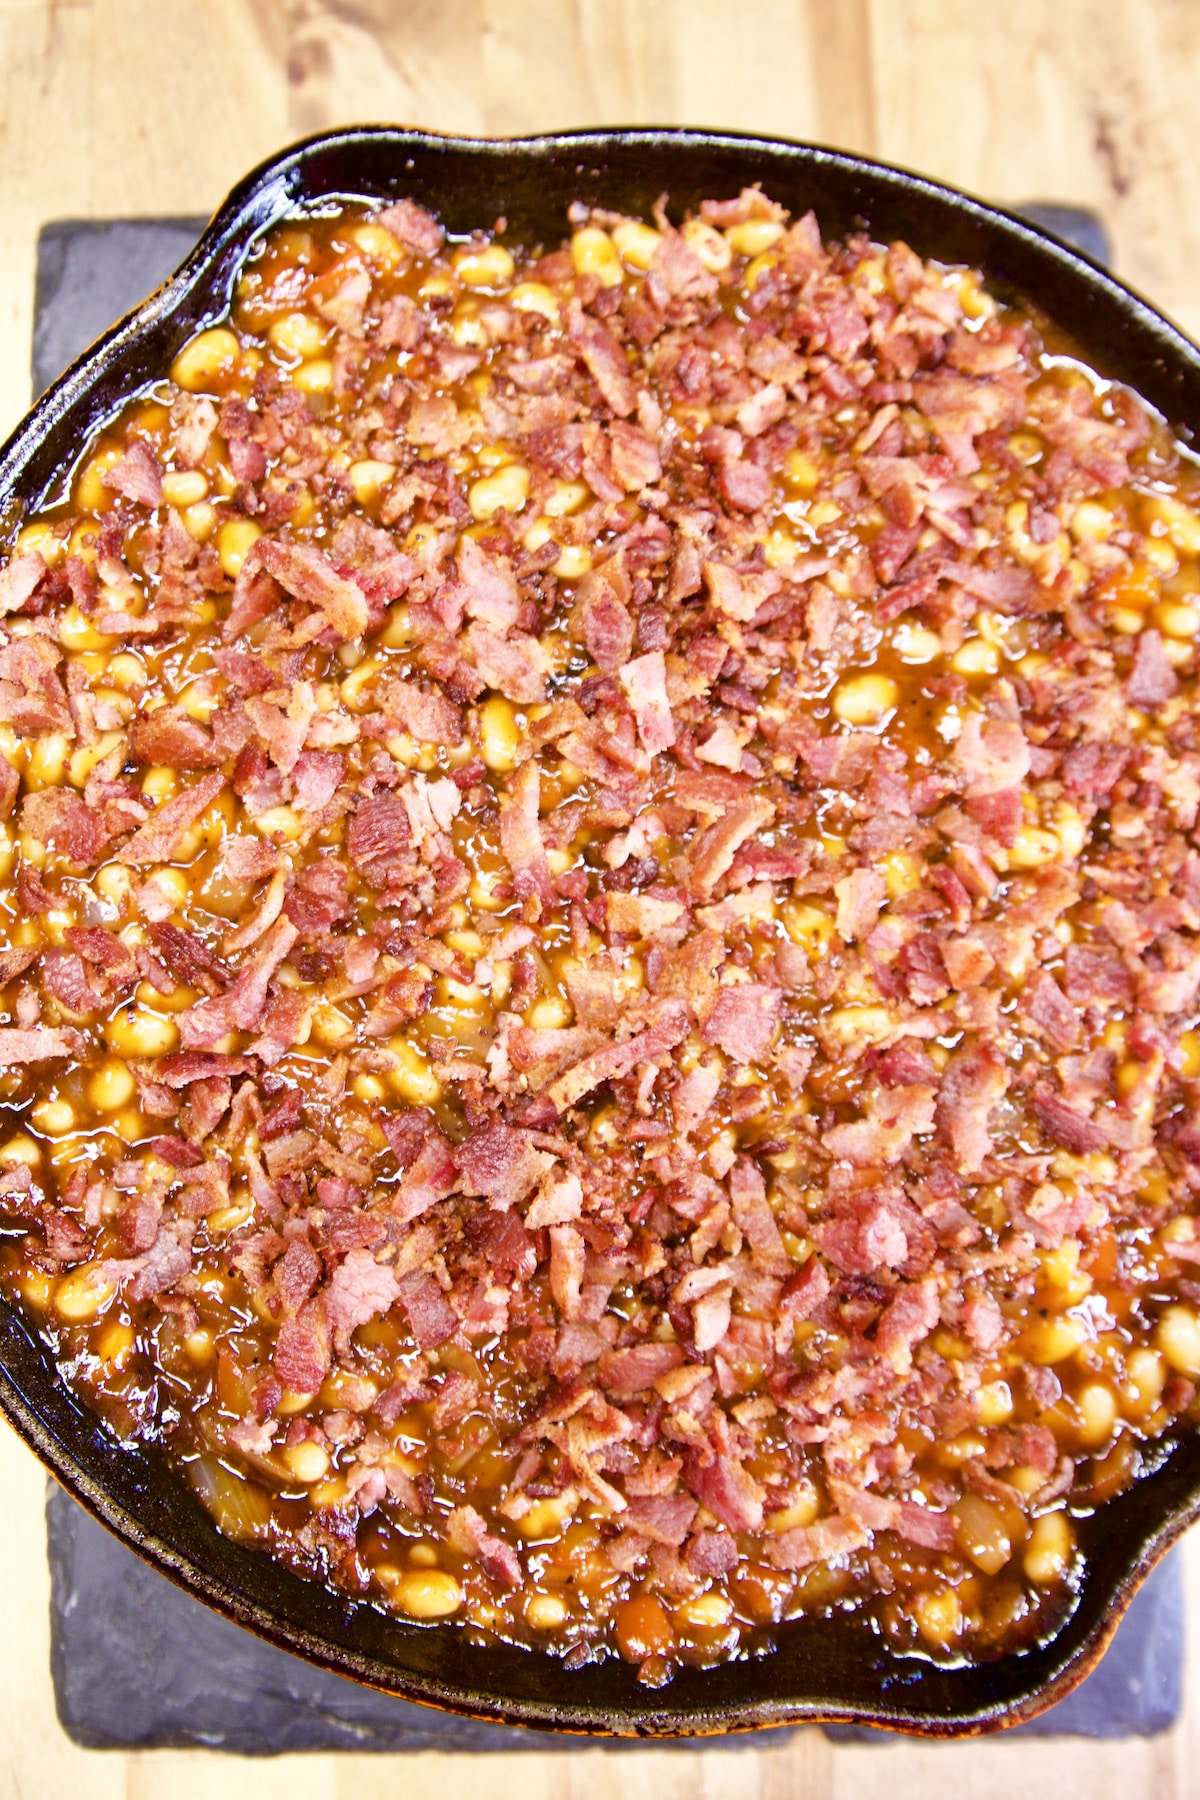 Skillet of baked beans topped with bacon.